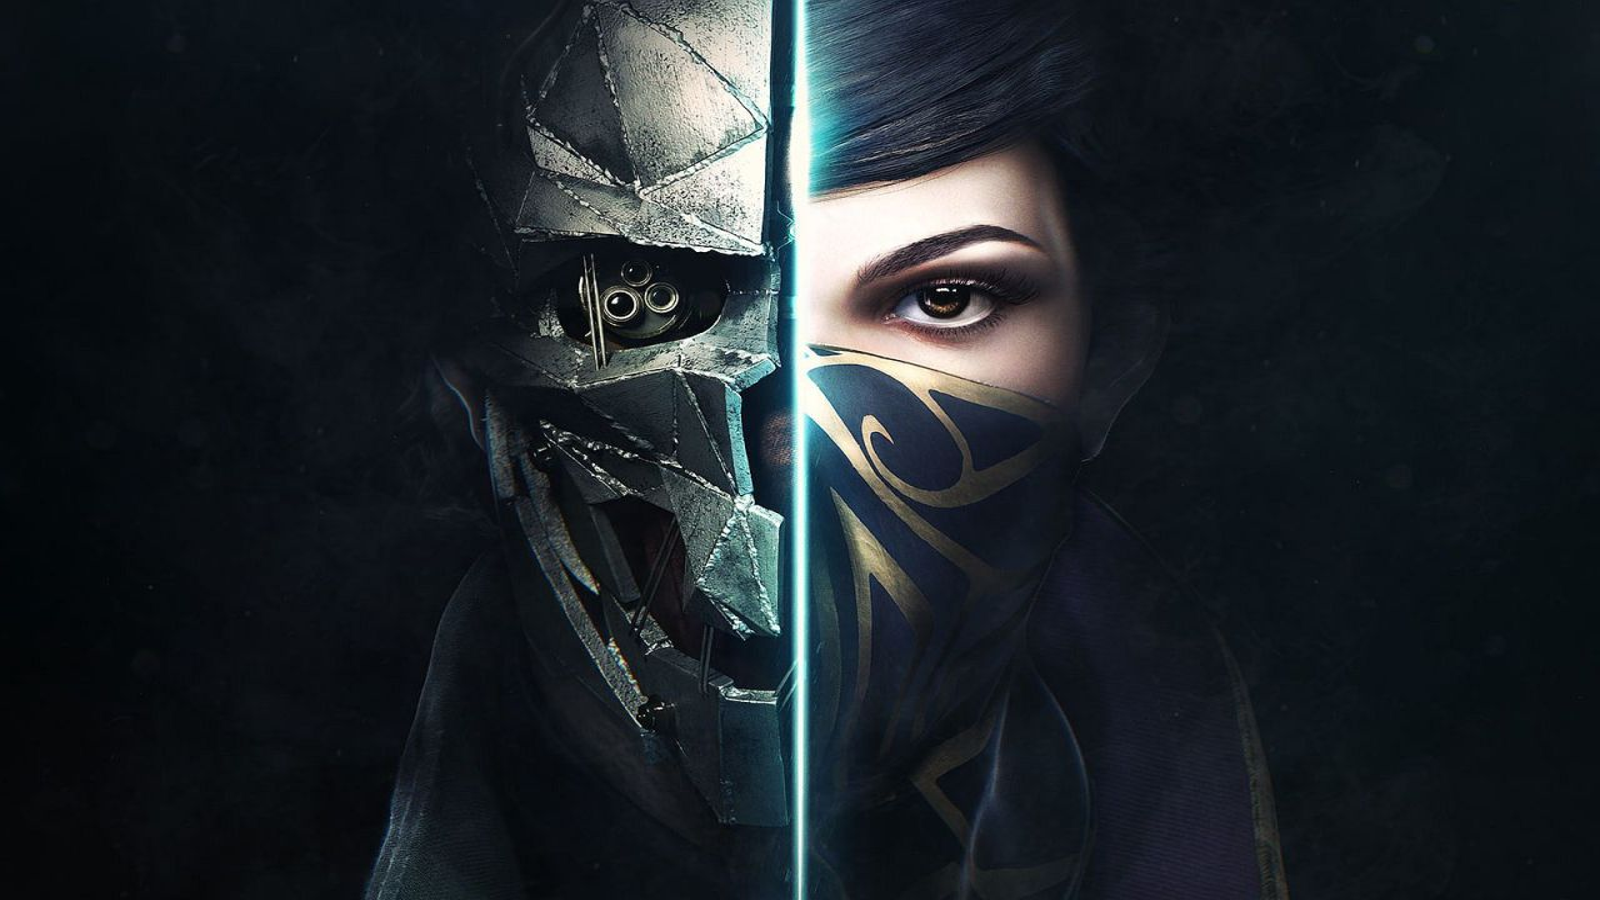 Harvey Smith confirms no co-op in Dishonored 2, stays mum on mod support